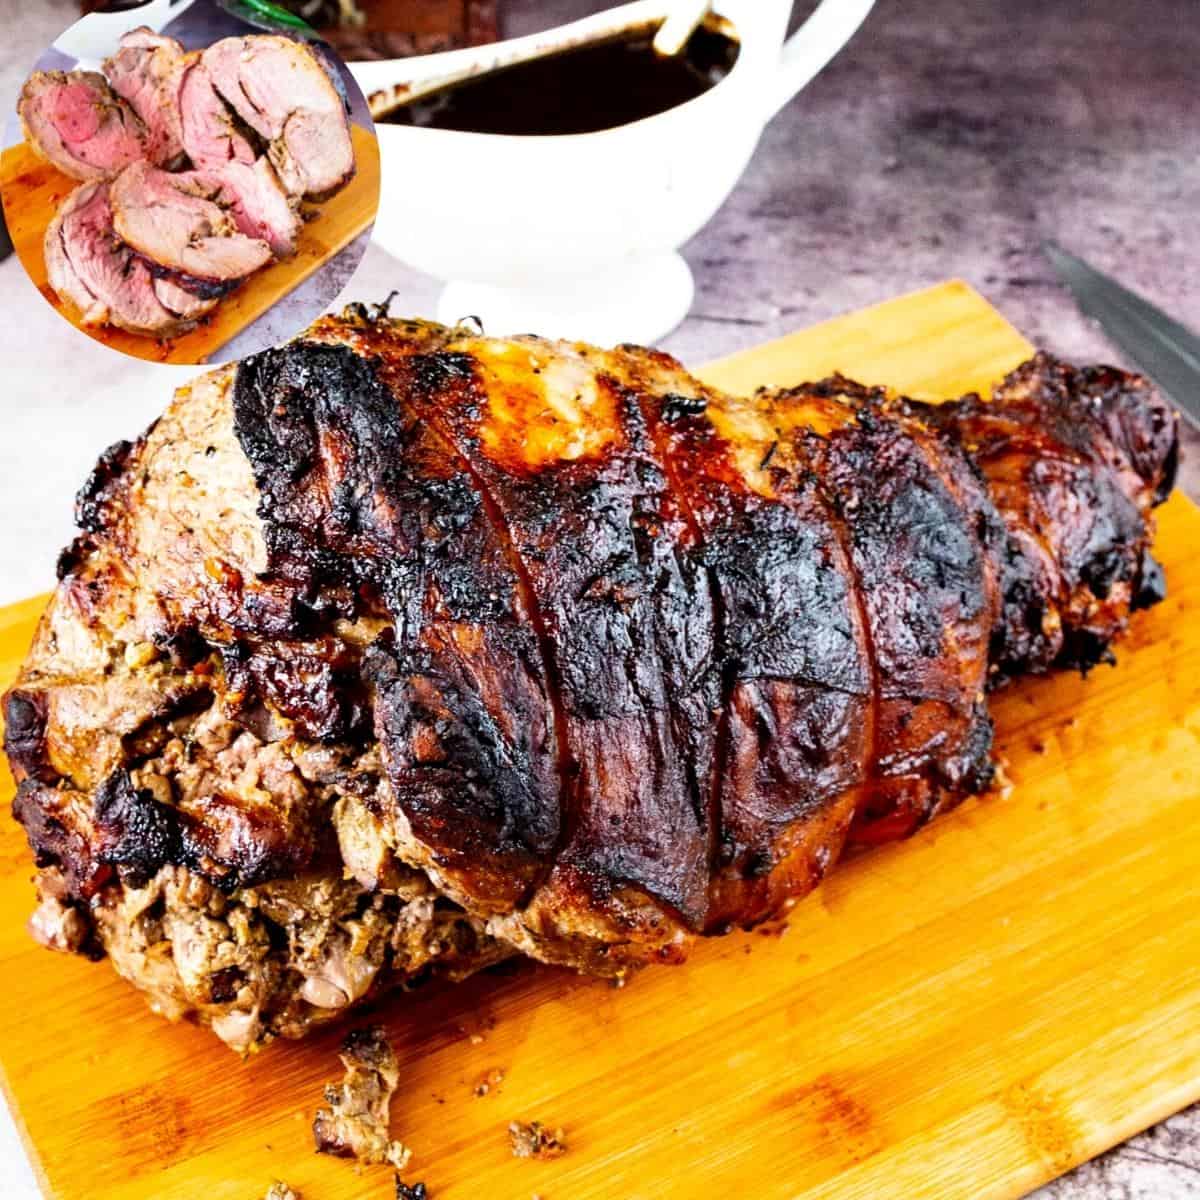 A leg of lamb on a wooden board.